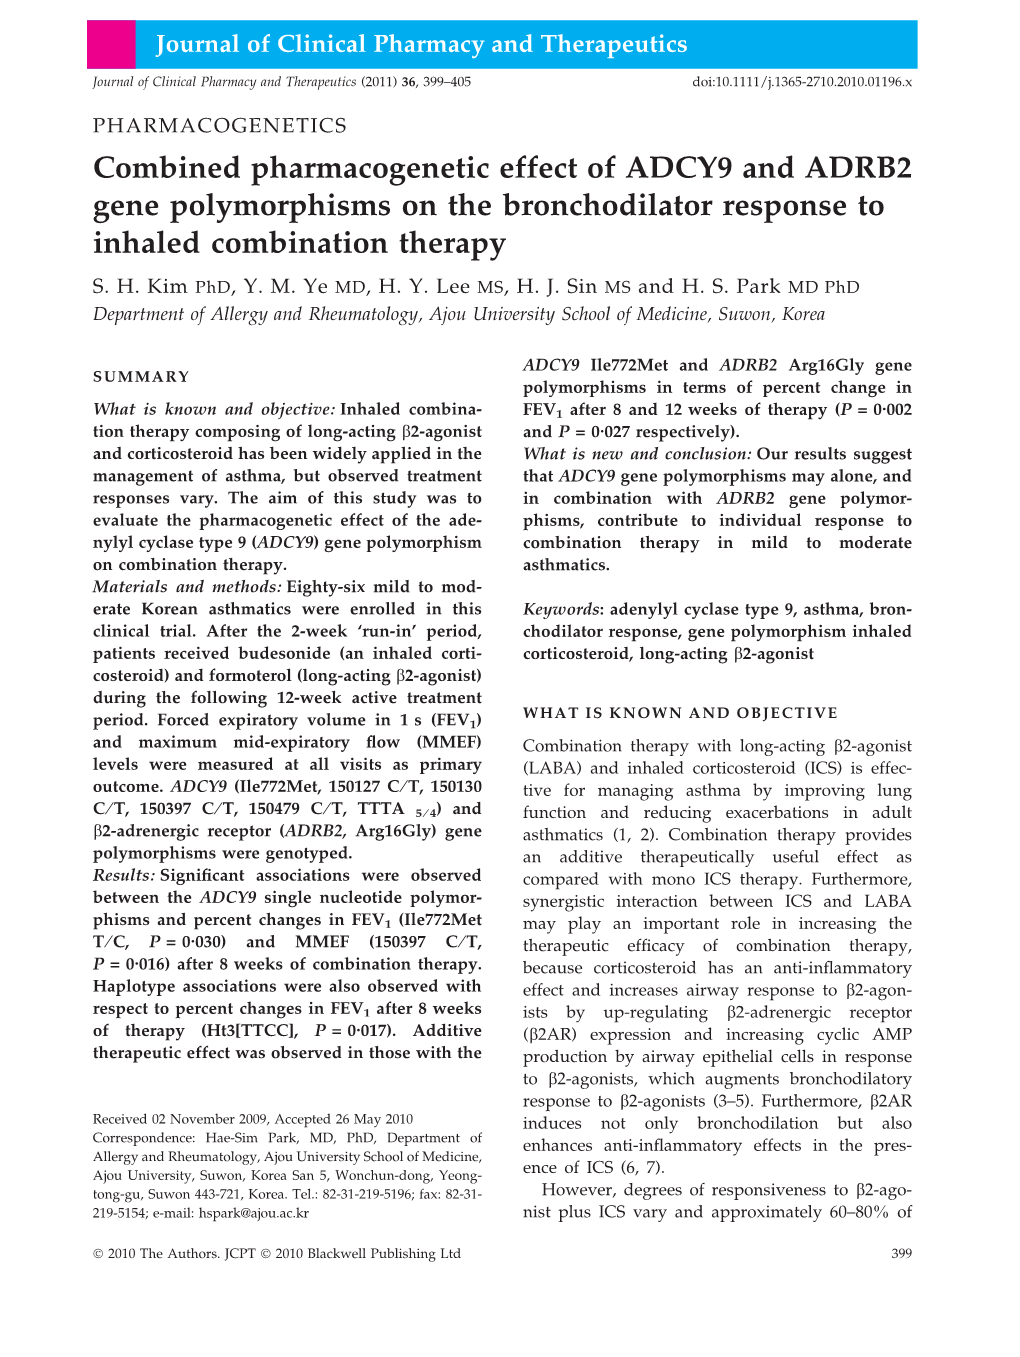 Combined Pharmacogenetic Effect of ADCY9 and ADRB2 Gene Polymorphisms on the Bronchodilator Response to Inhaled Combination Therapy